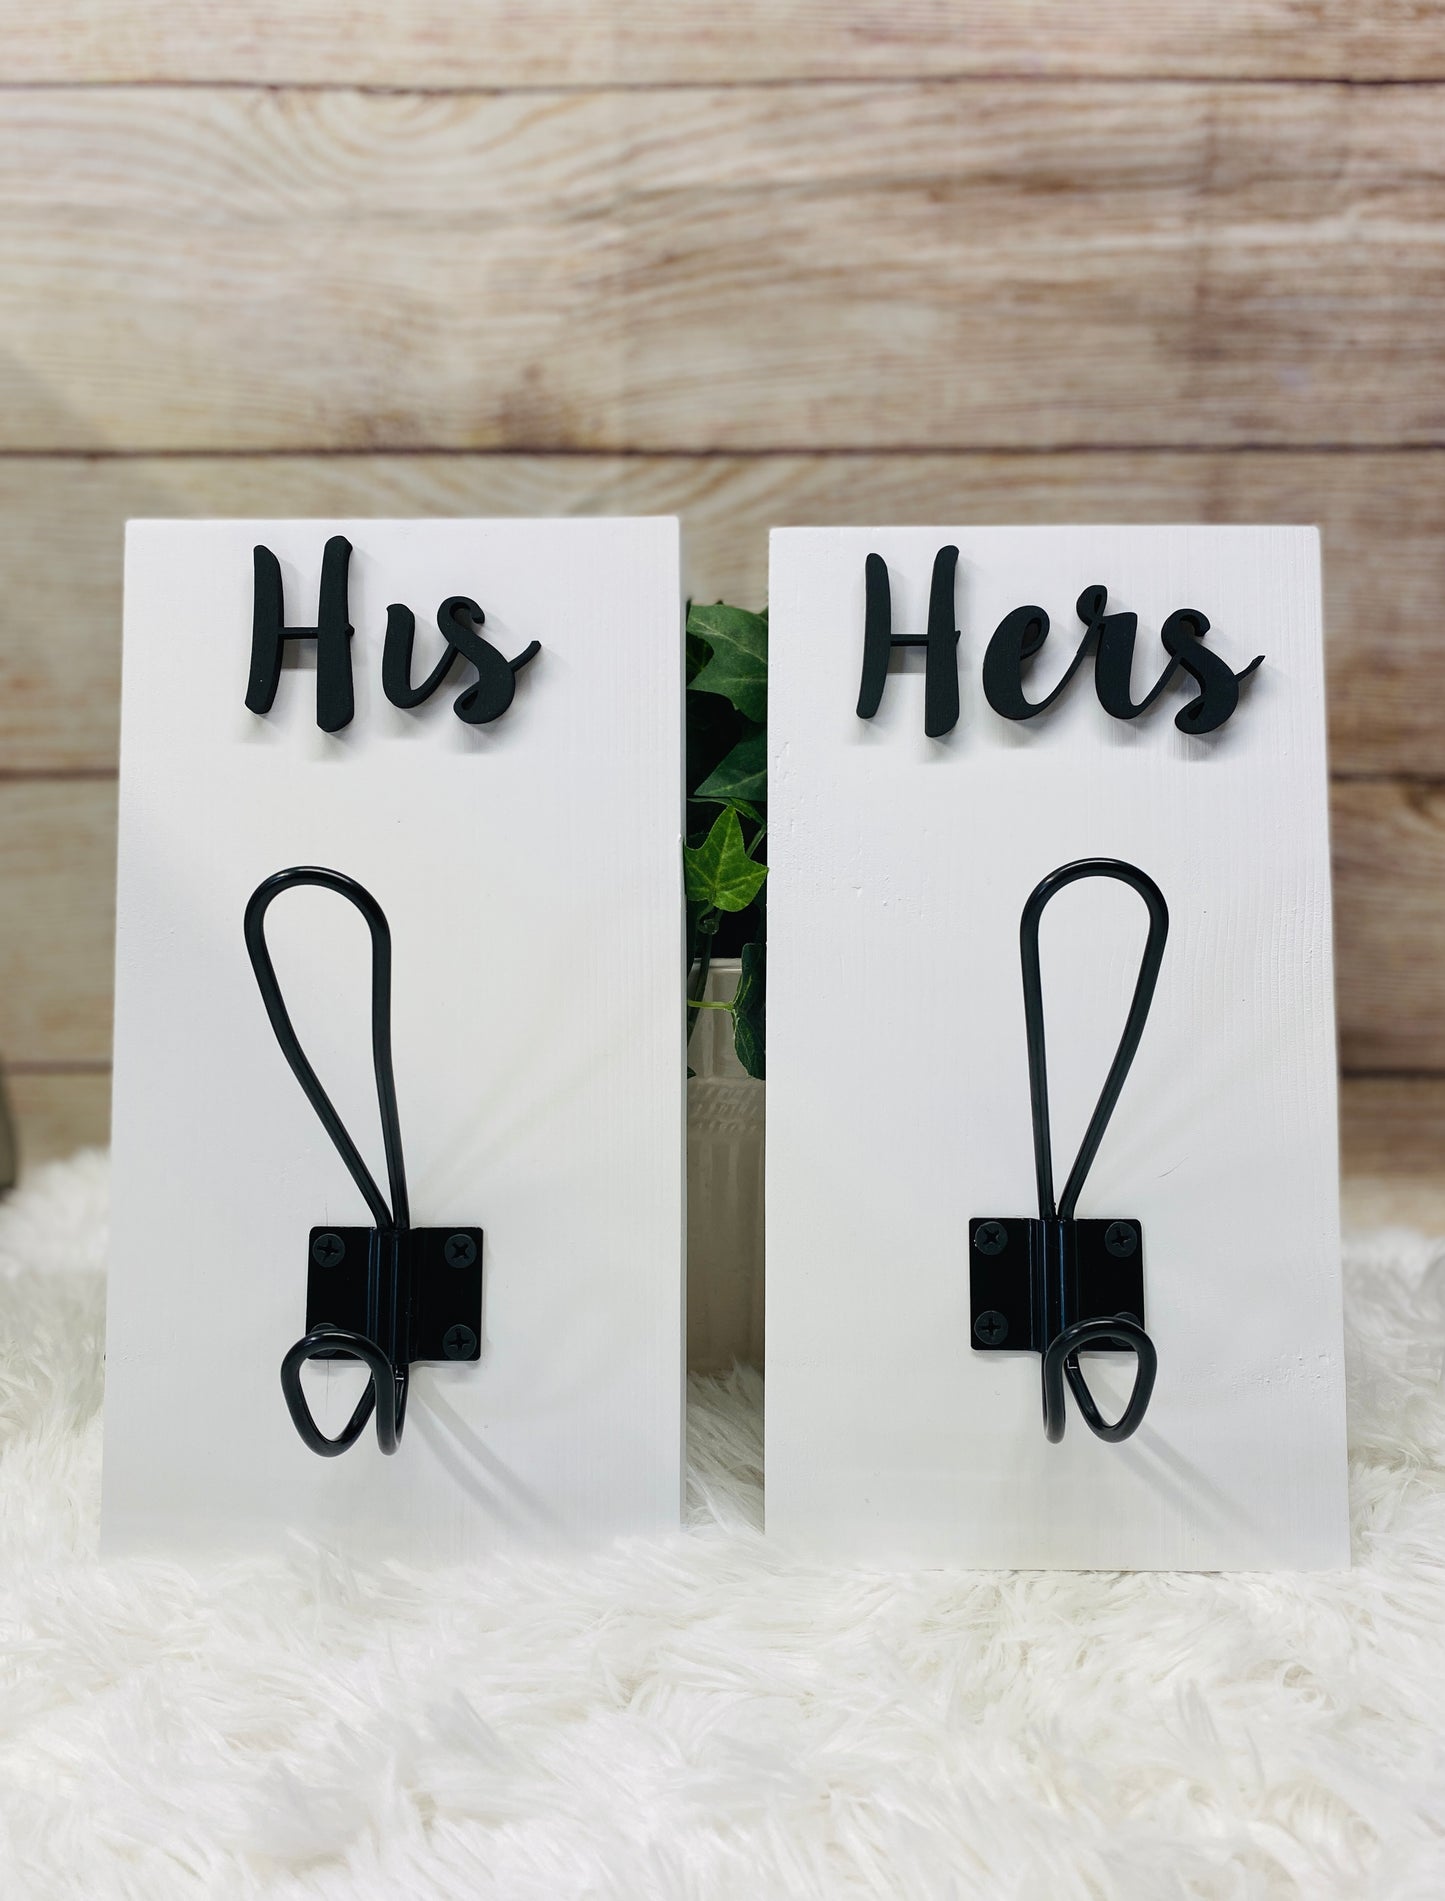 His and Hers Towel Hook Set